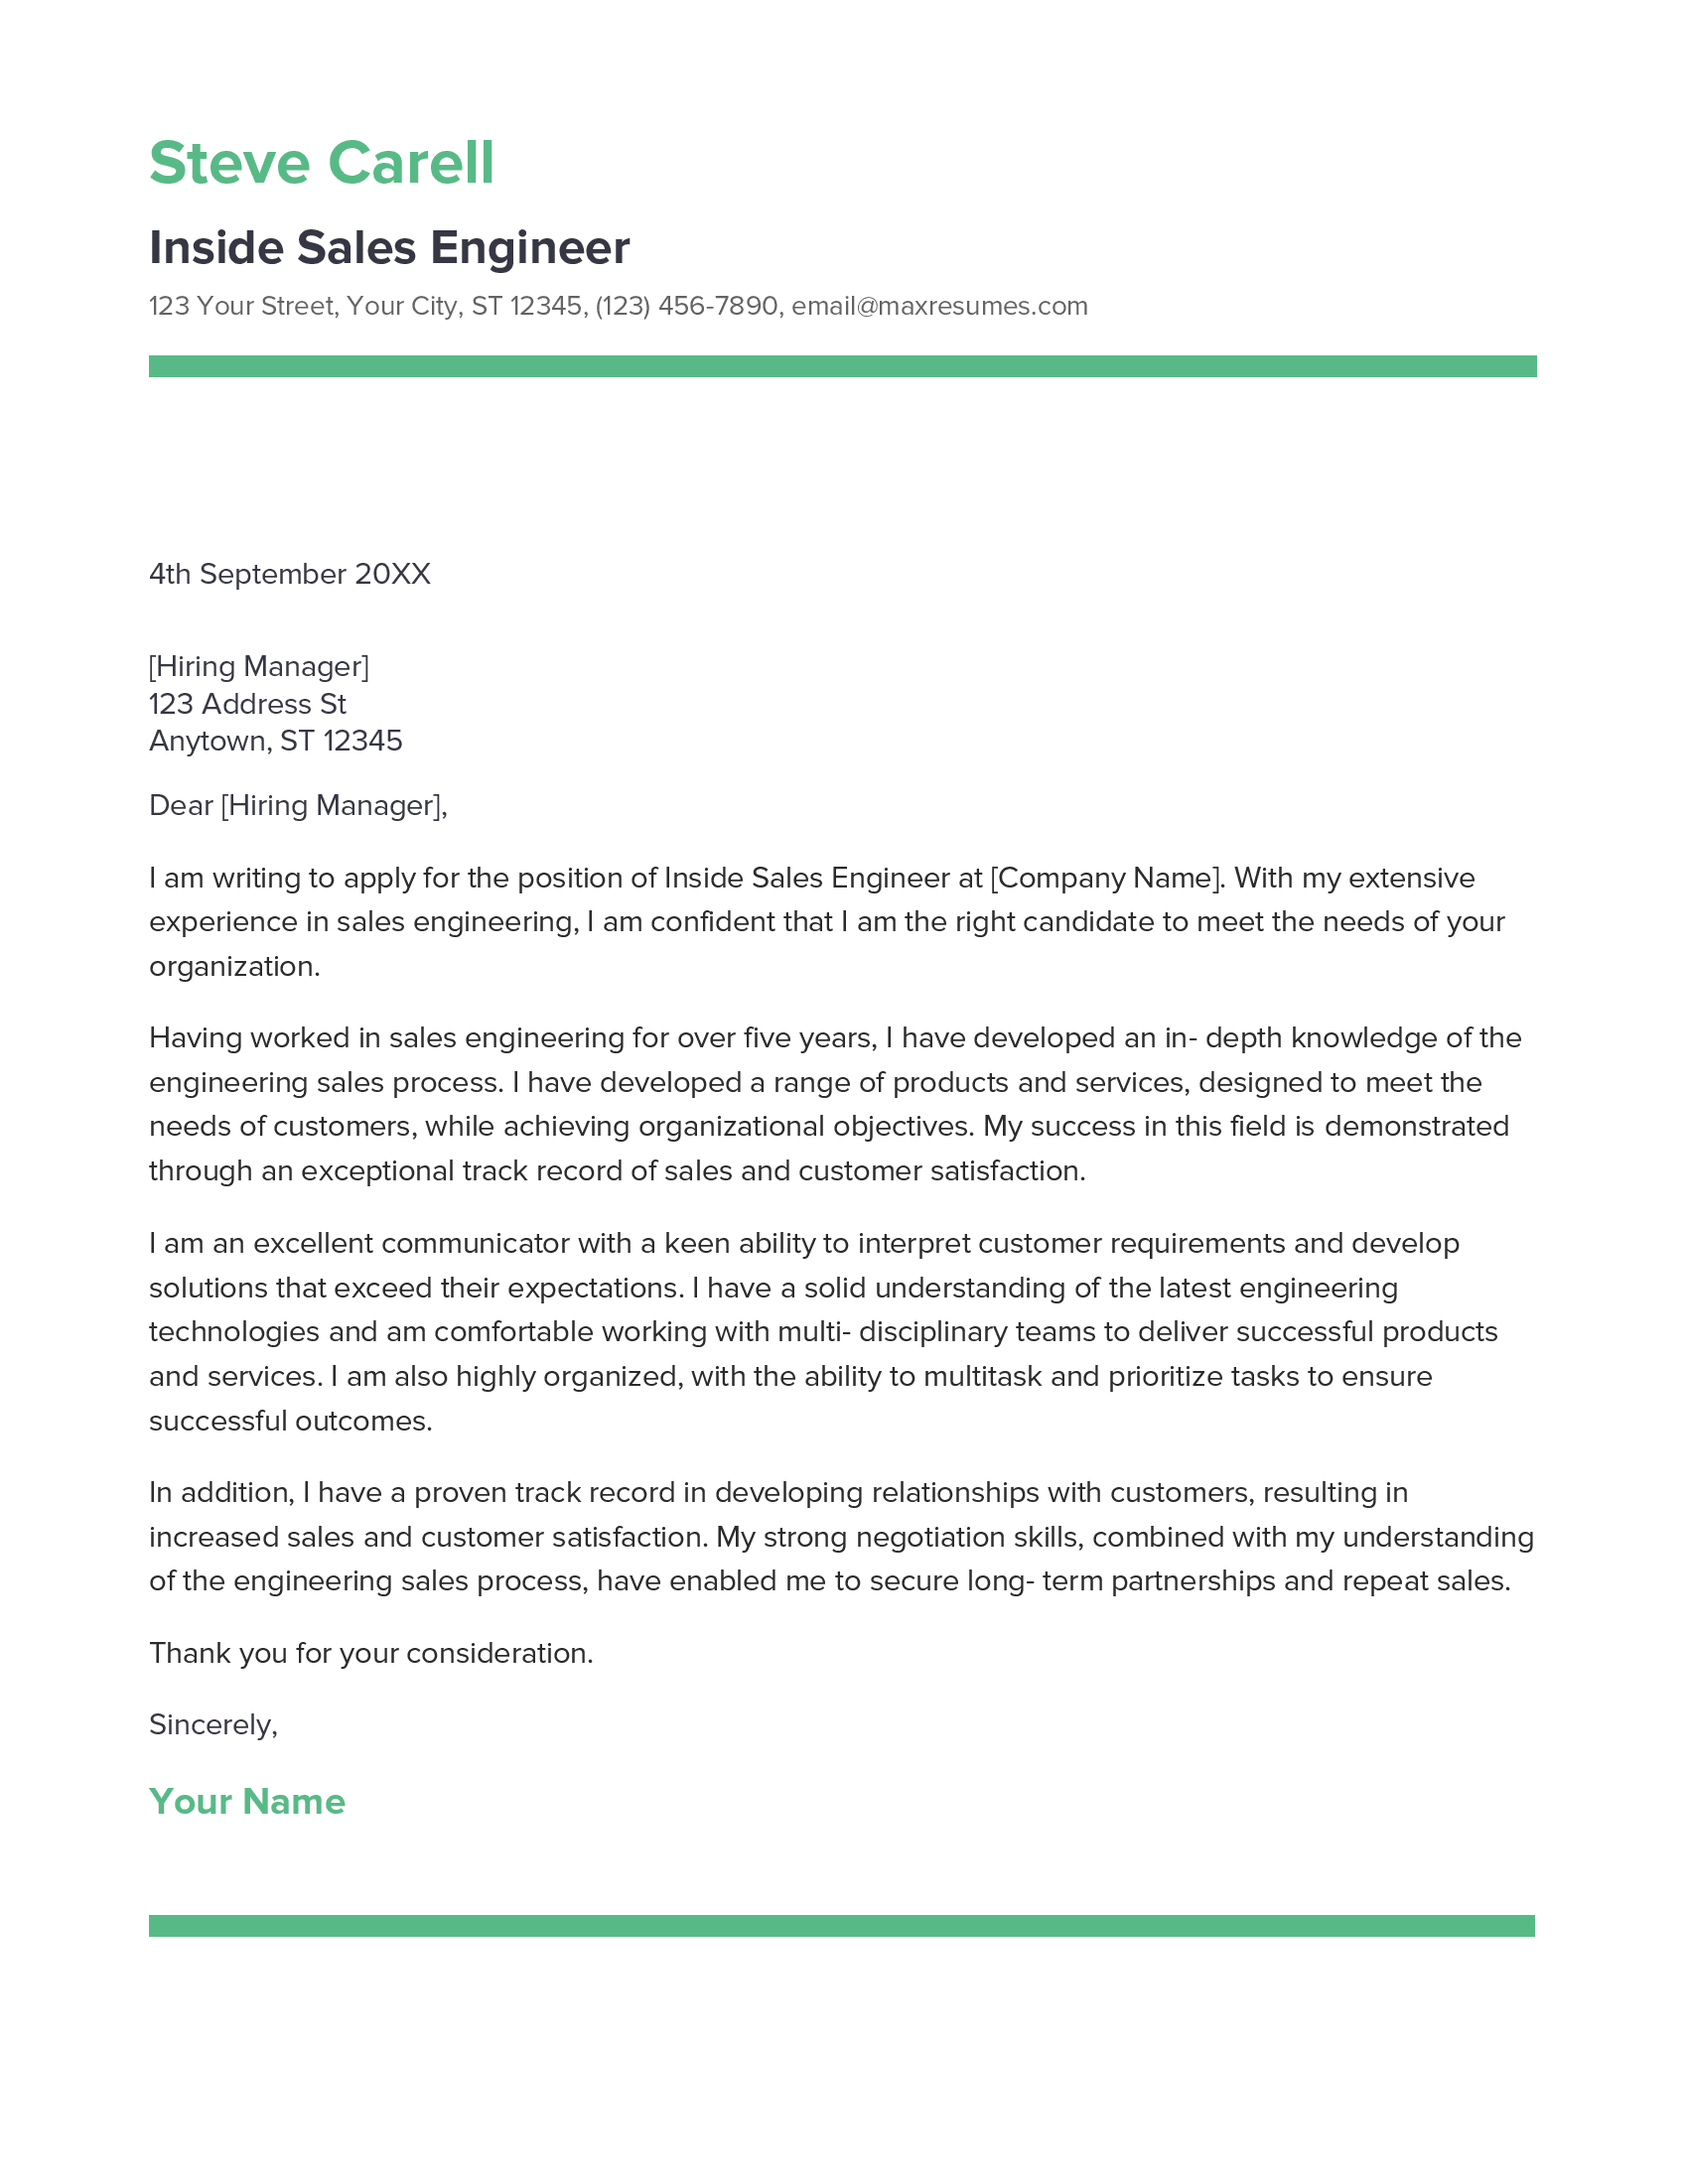 Inside Sales Engineer Cover Letter Example